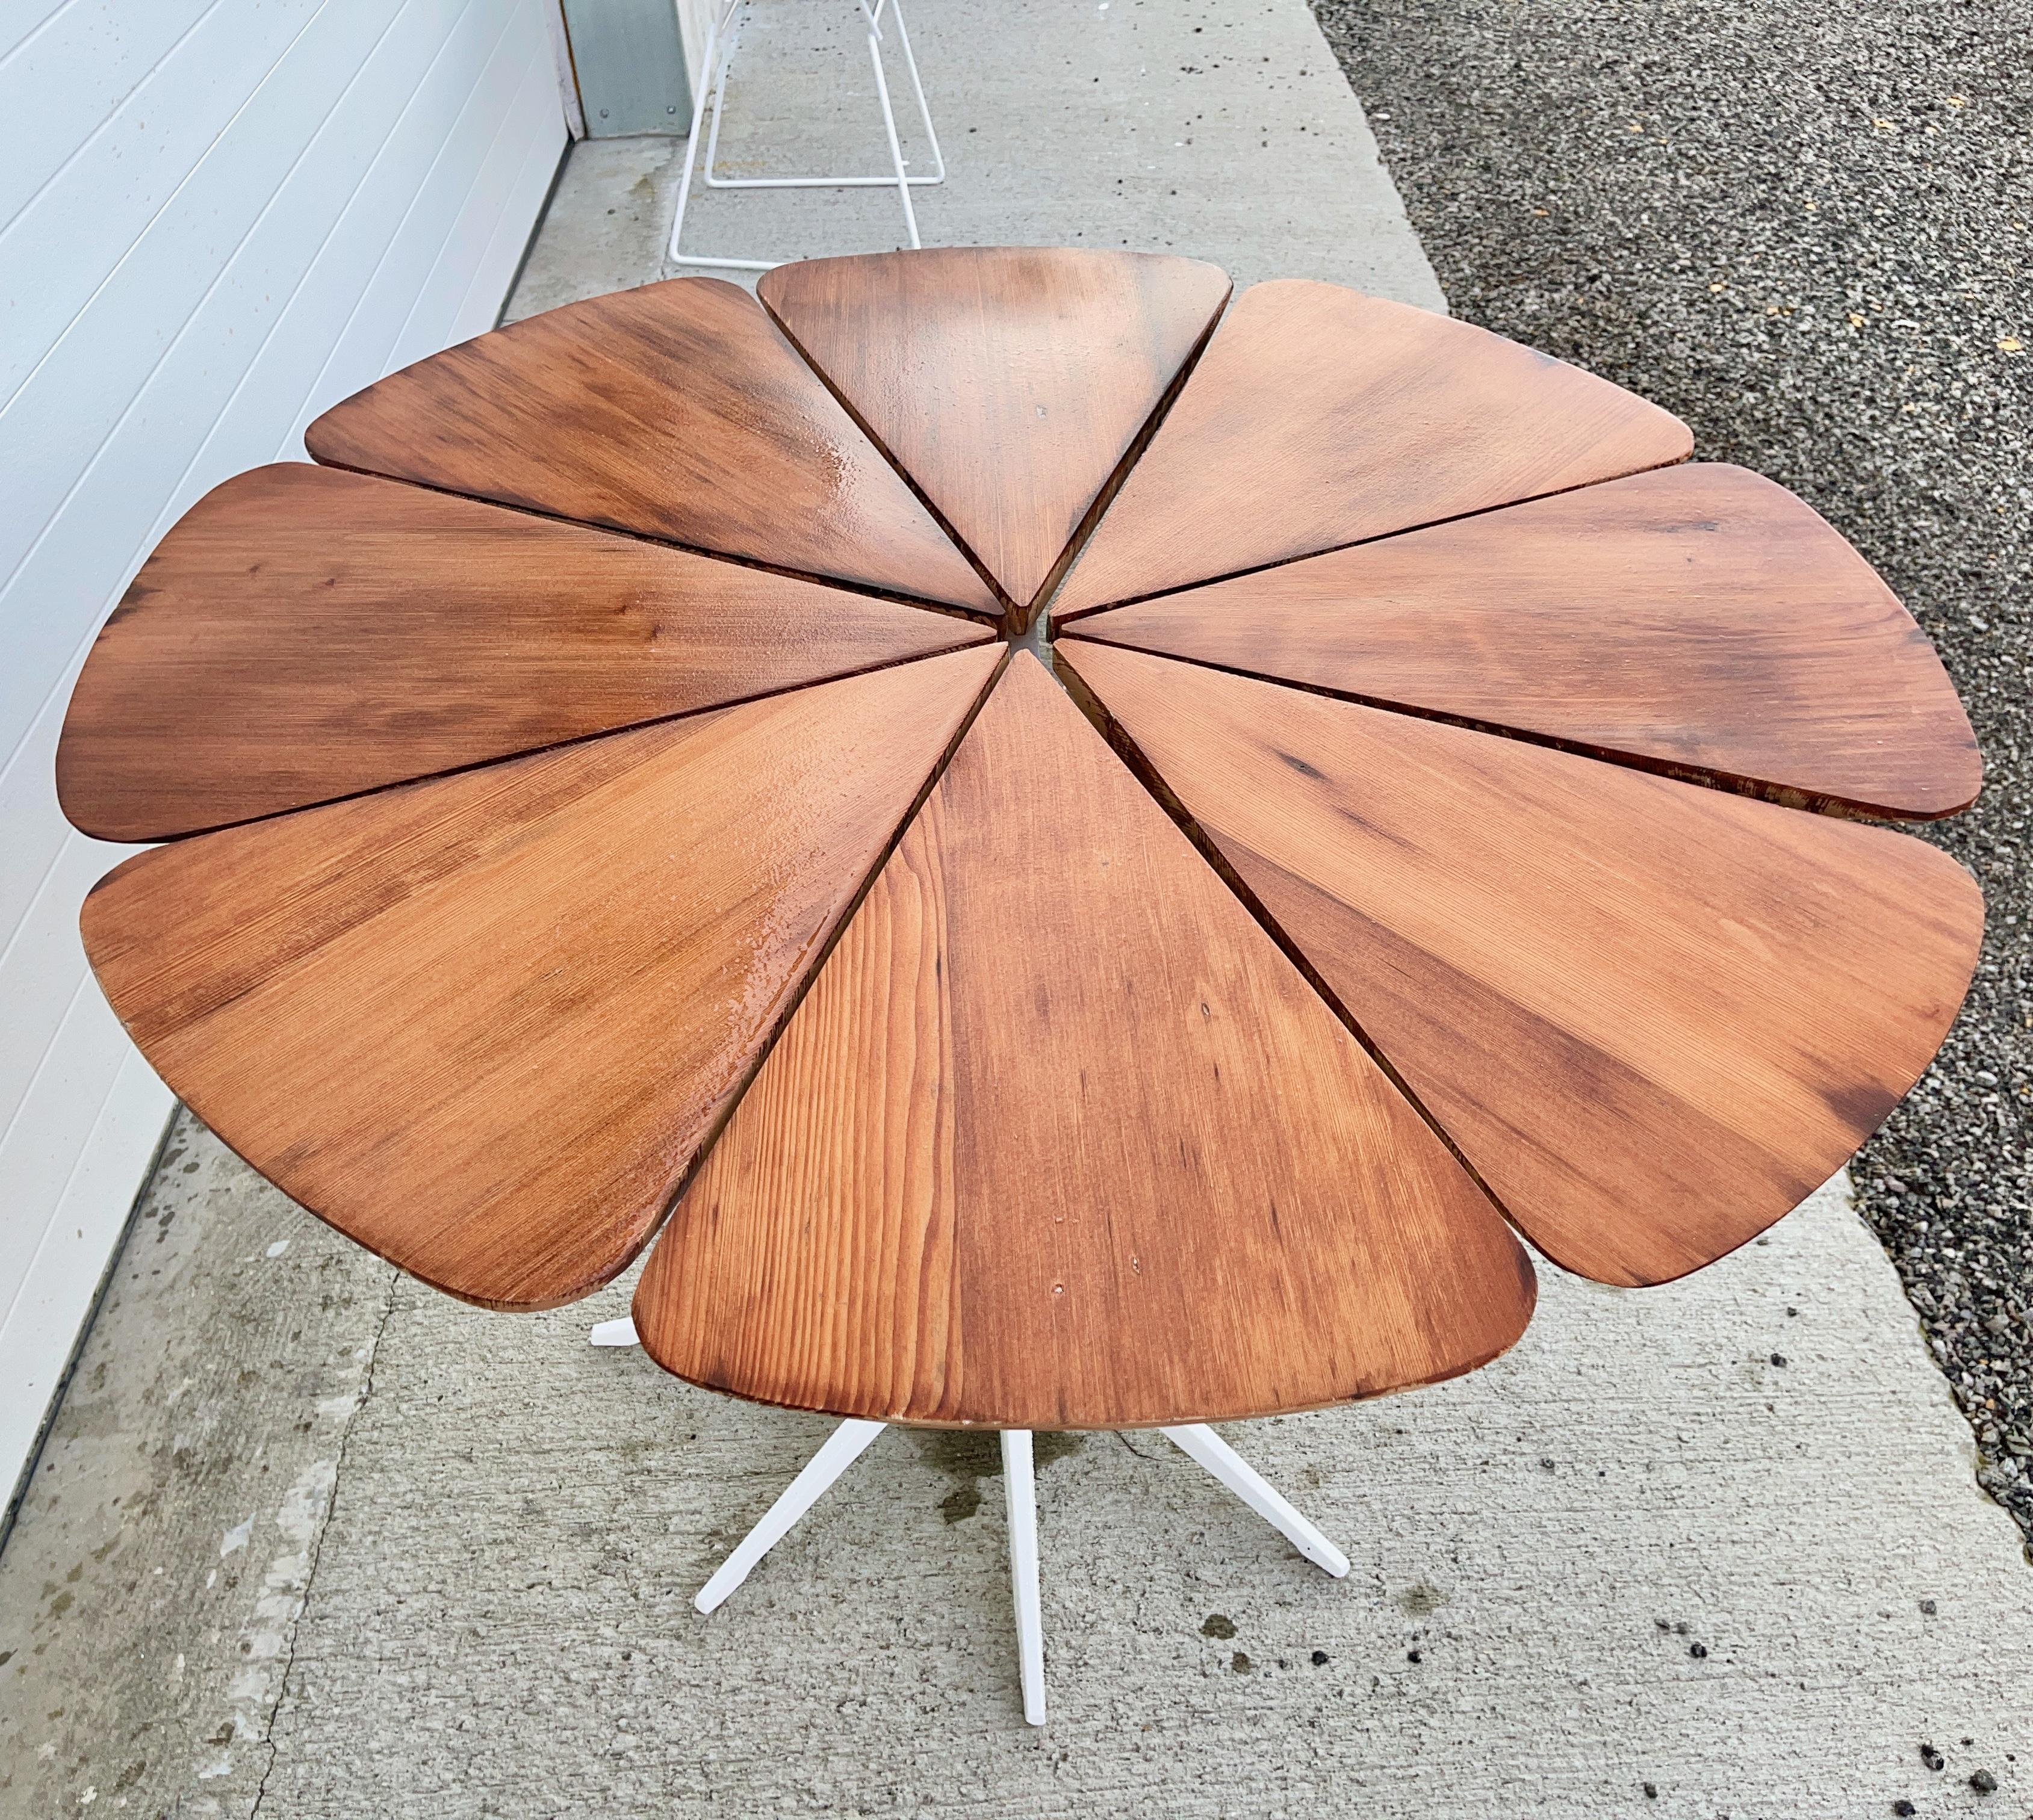 1961 Petal Dining Table by Richard Schultz for Knoll in California Redwood For Sale 6